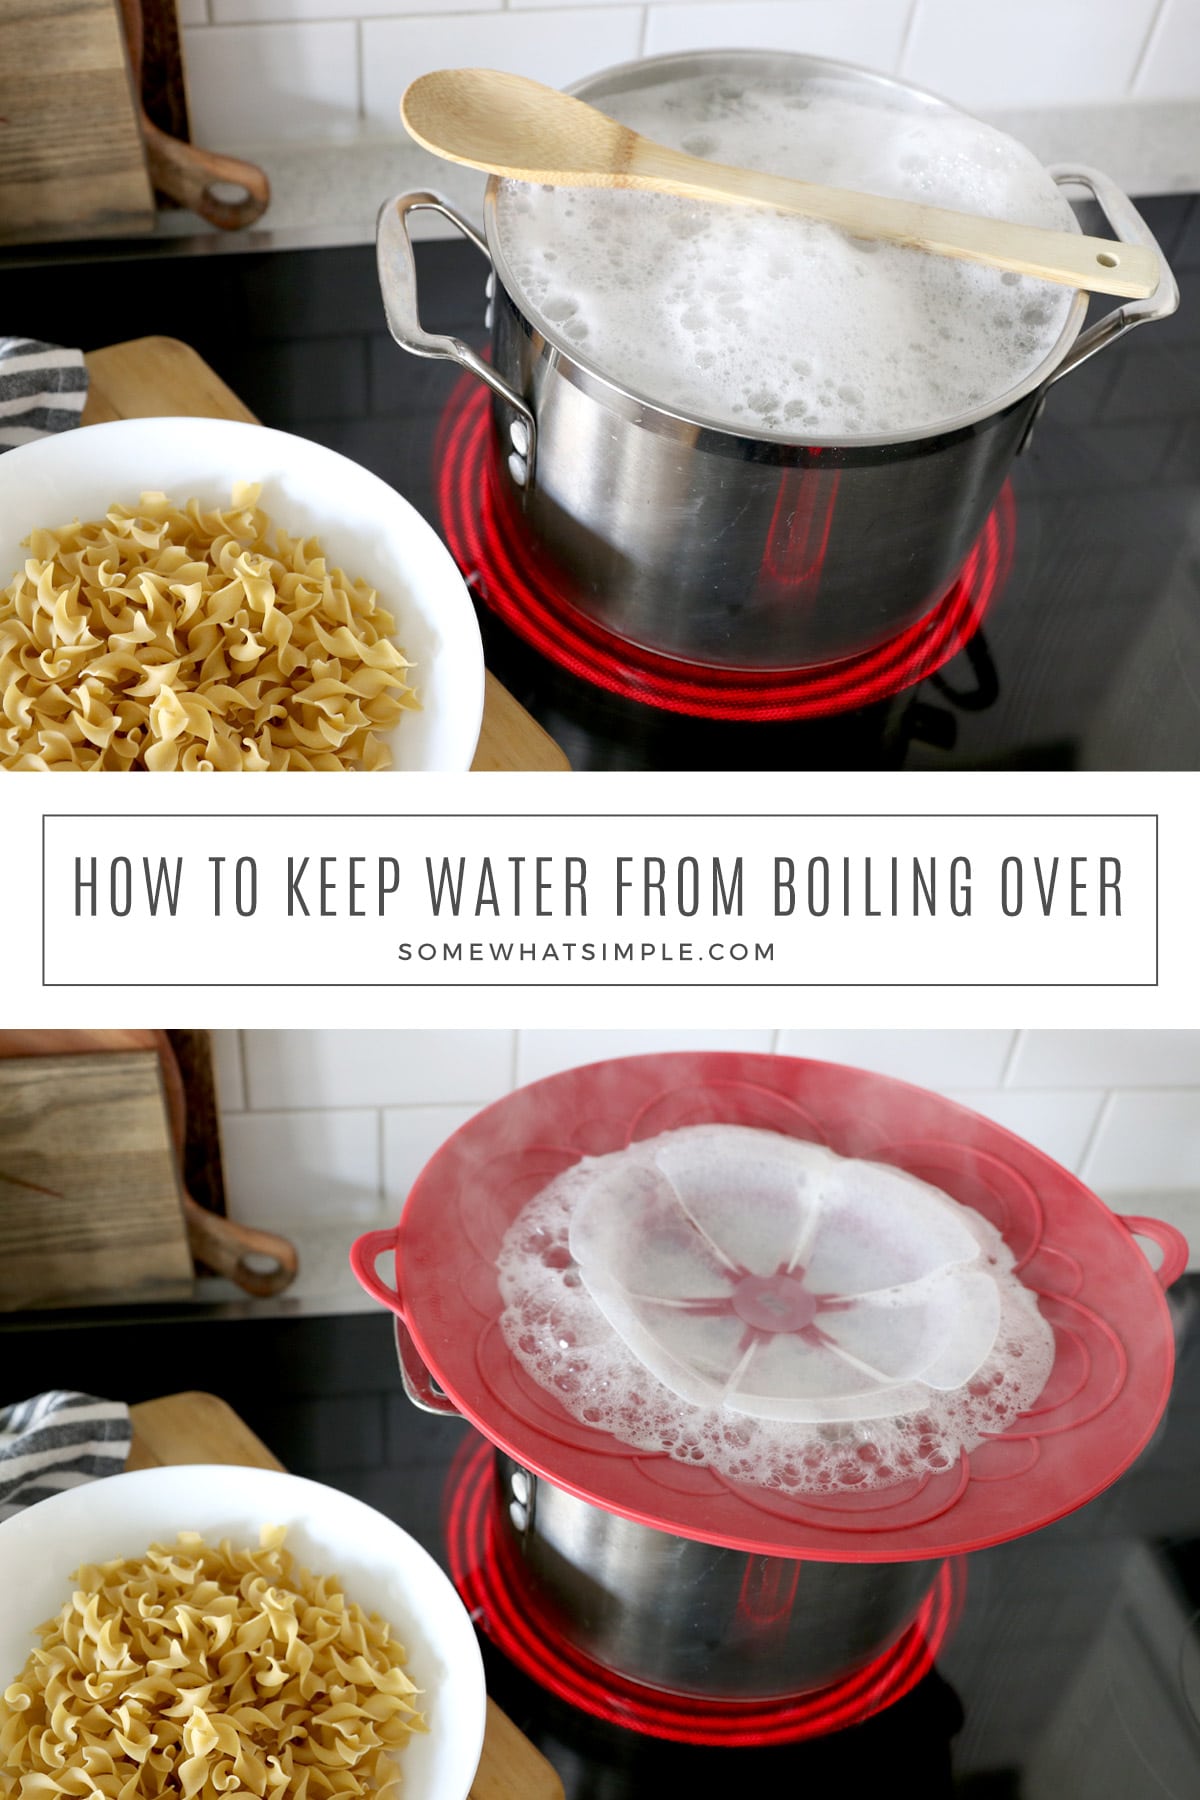 https://www.somewhatsimple.com/wp-content/uploads/2022/02/how-to-keep-water-from-boiling-over-easy.jpg